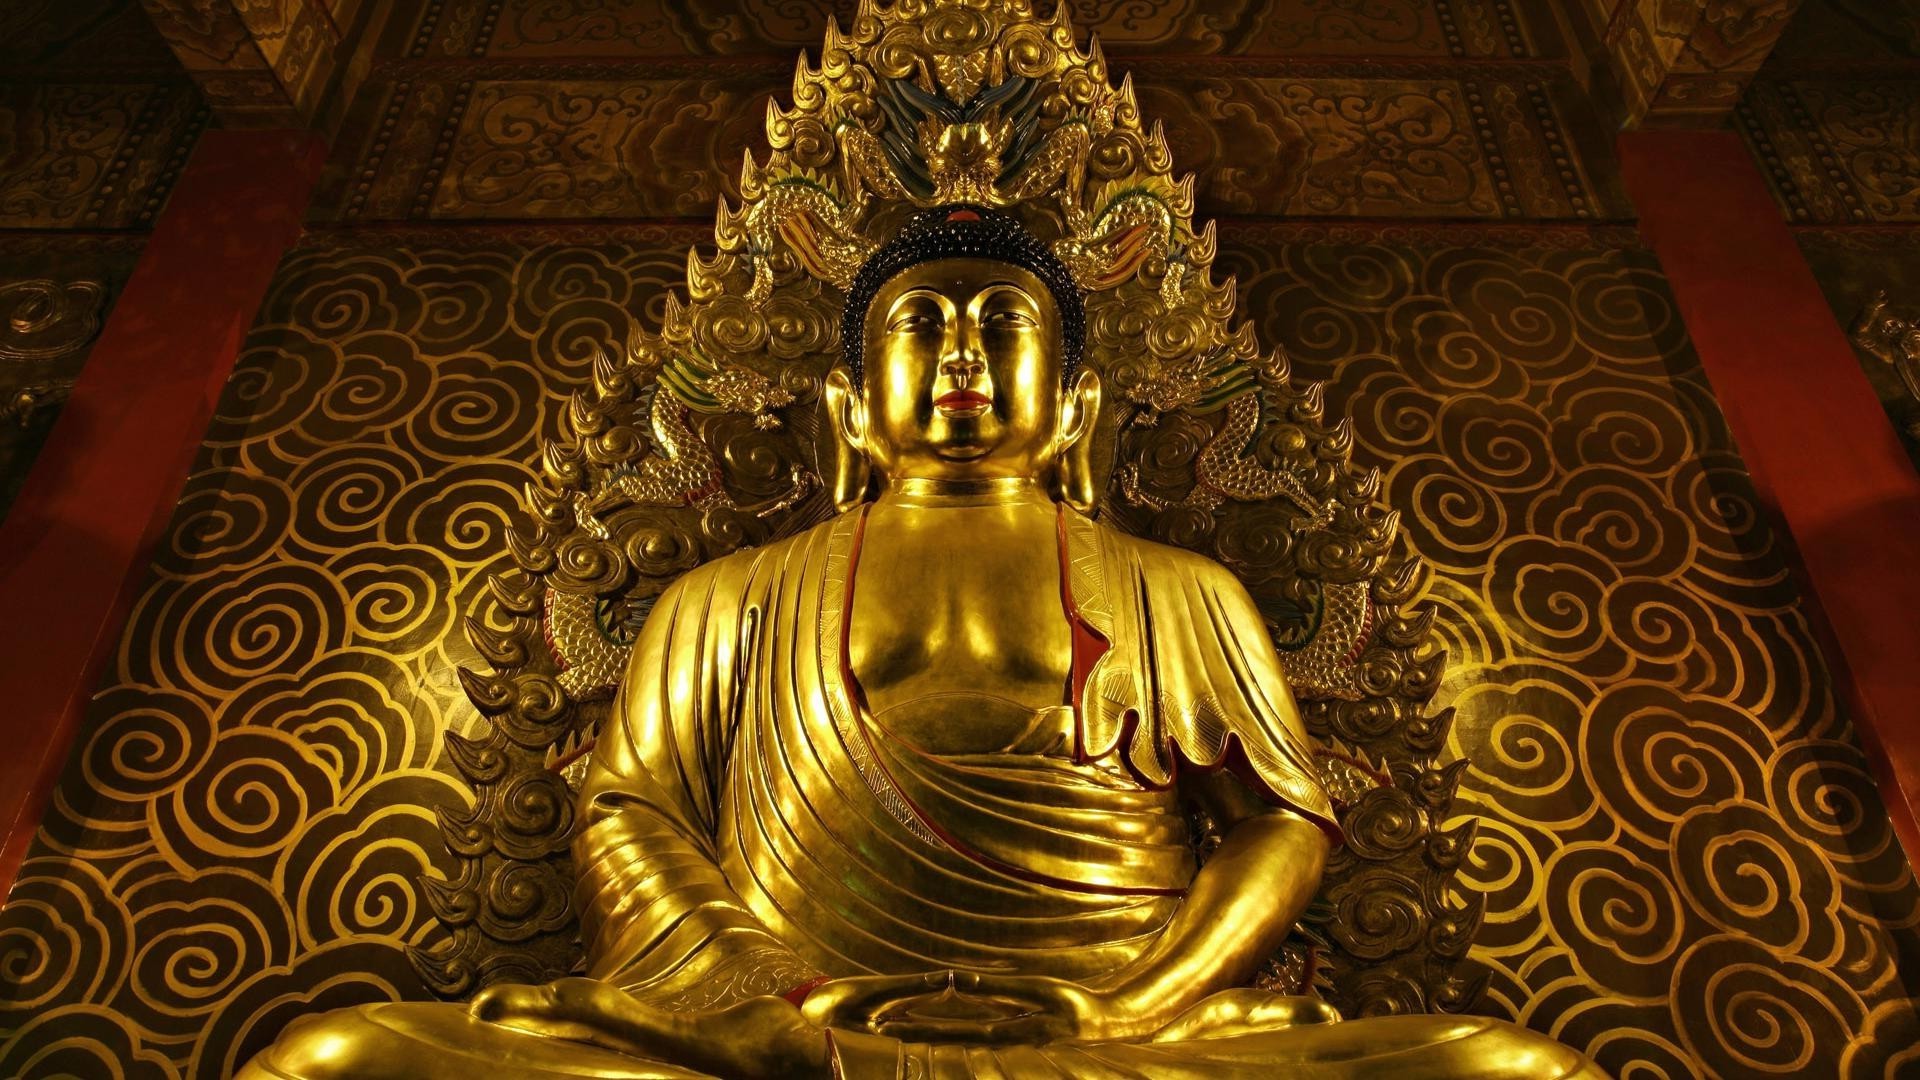 city and architecture gold buddha religion temple meditation decoration wat spirituality sculpture ancient zen luxury statue art castle travel peace worship monastery sacred